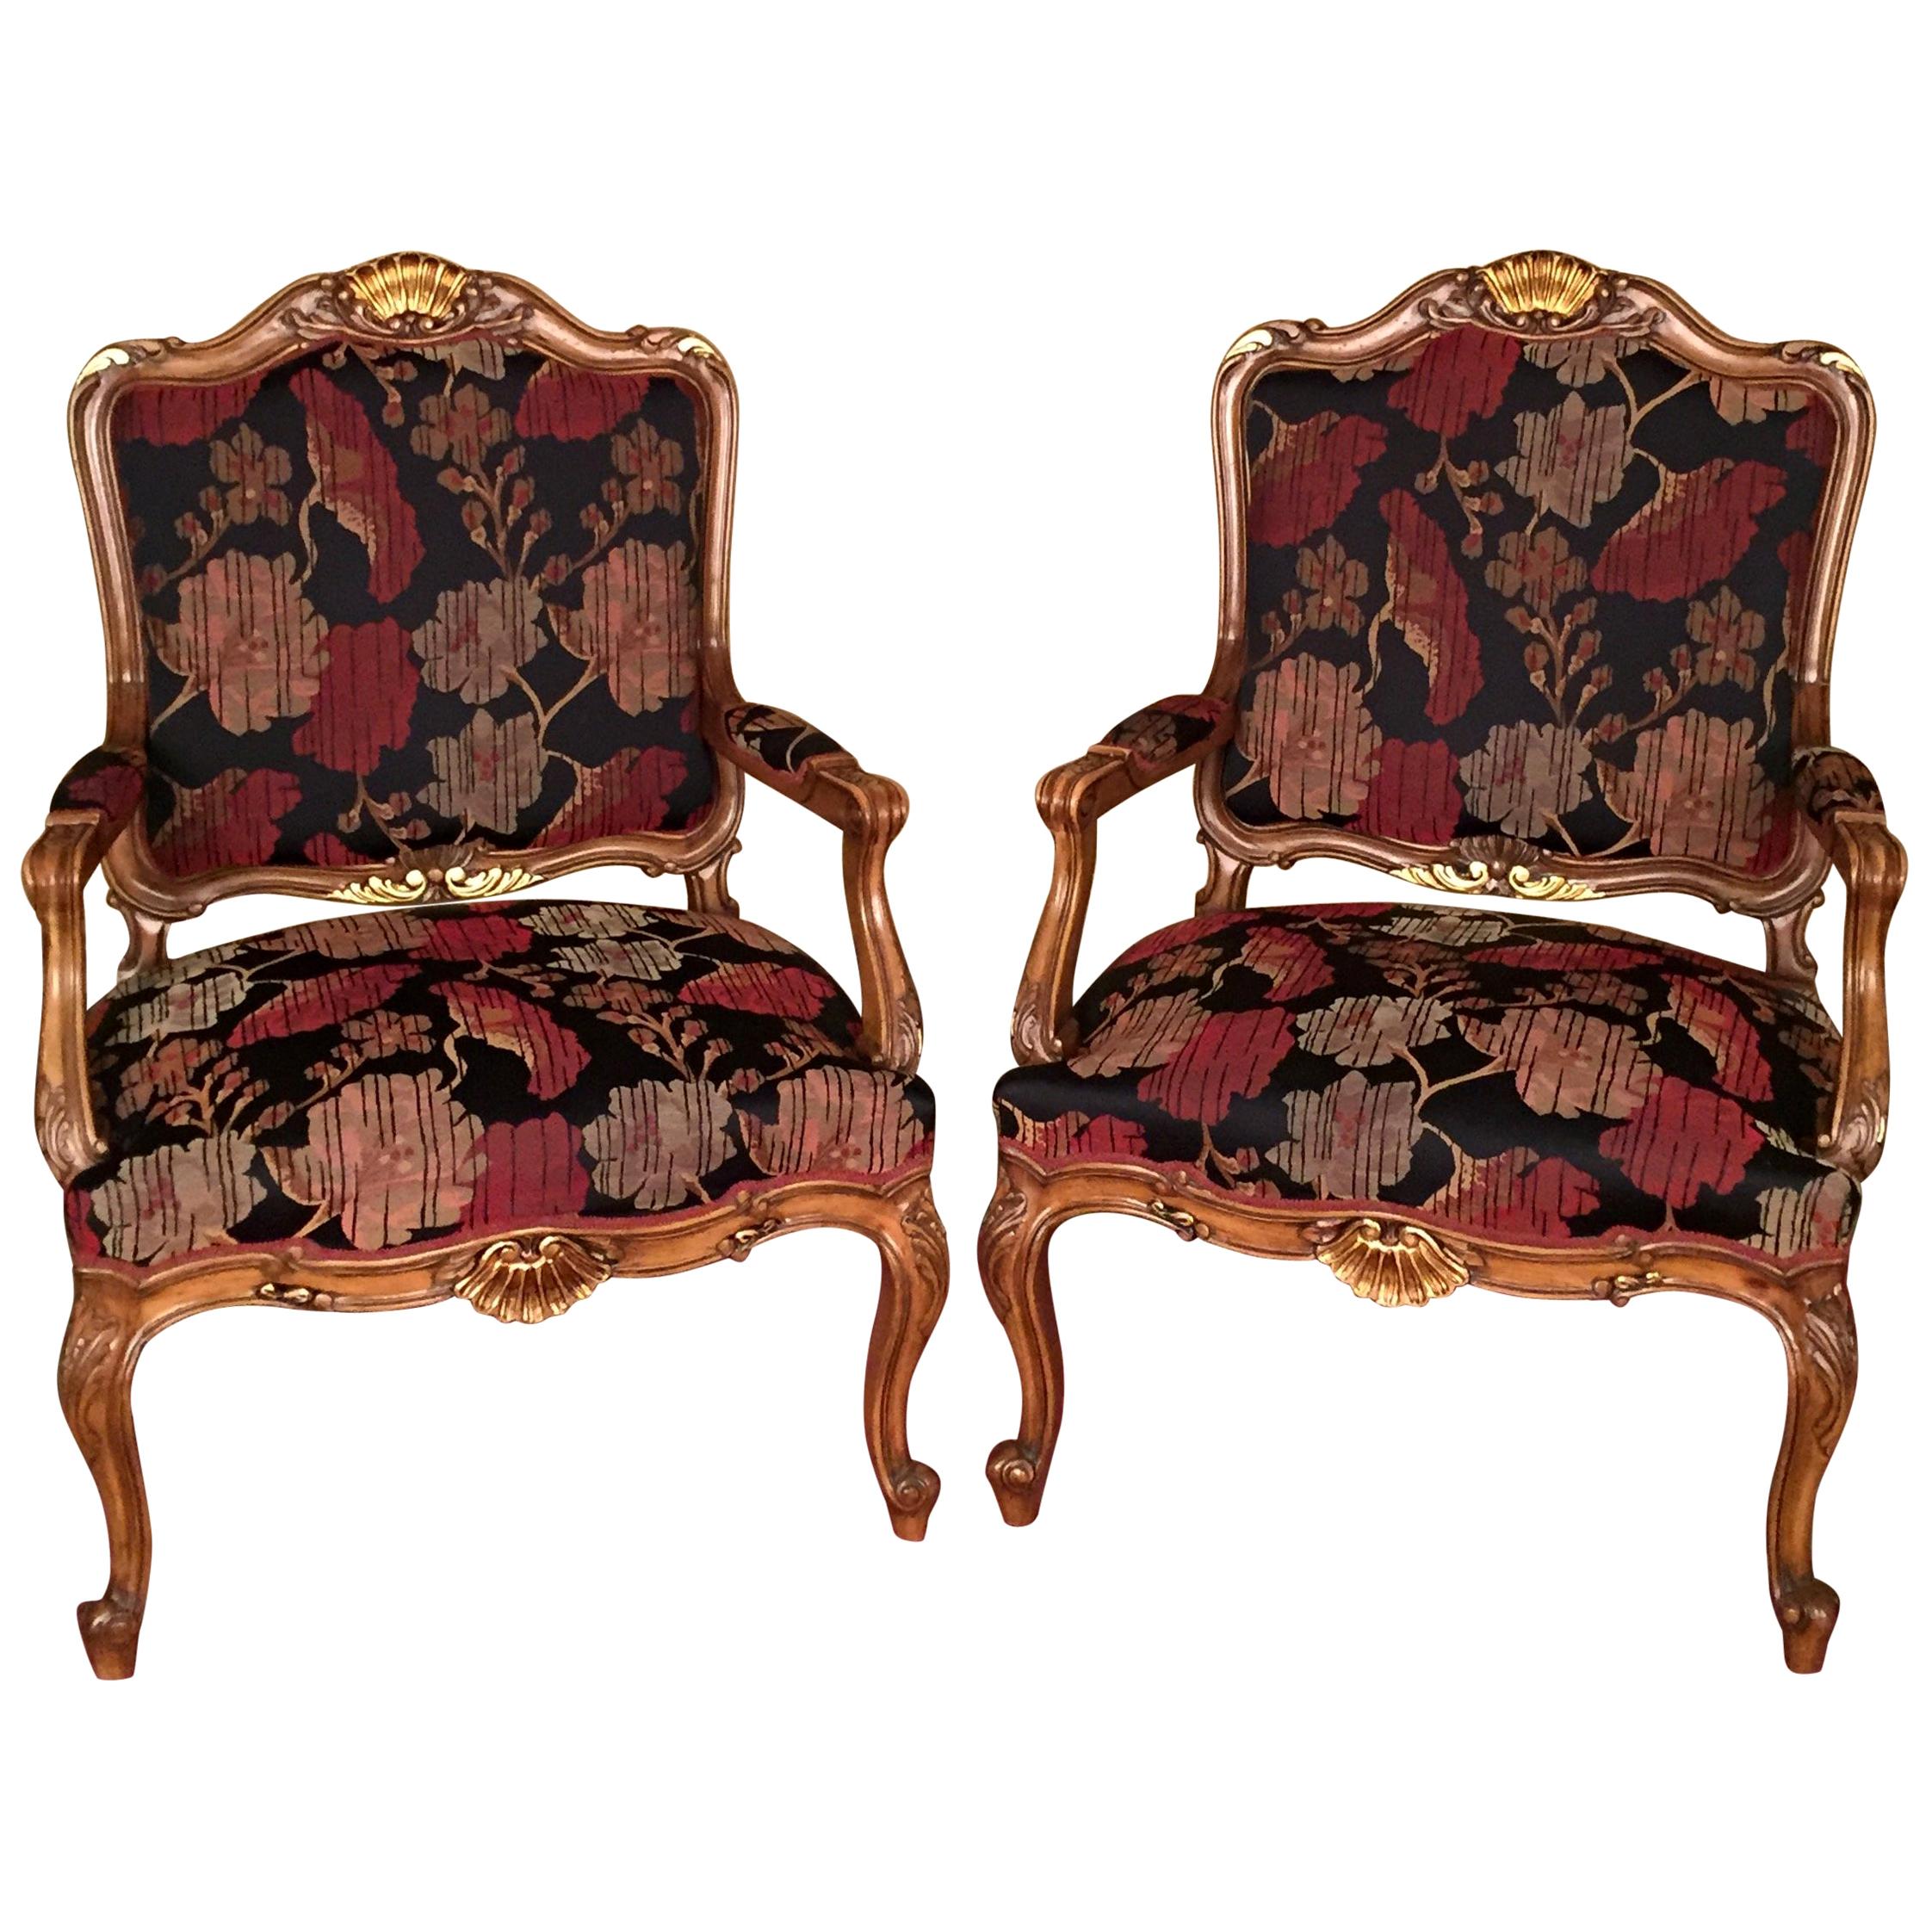 20th Century Neo Baroque Pair of Armchairs, Solid Walnut